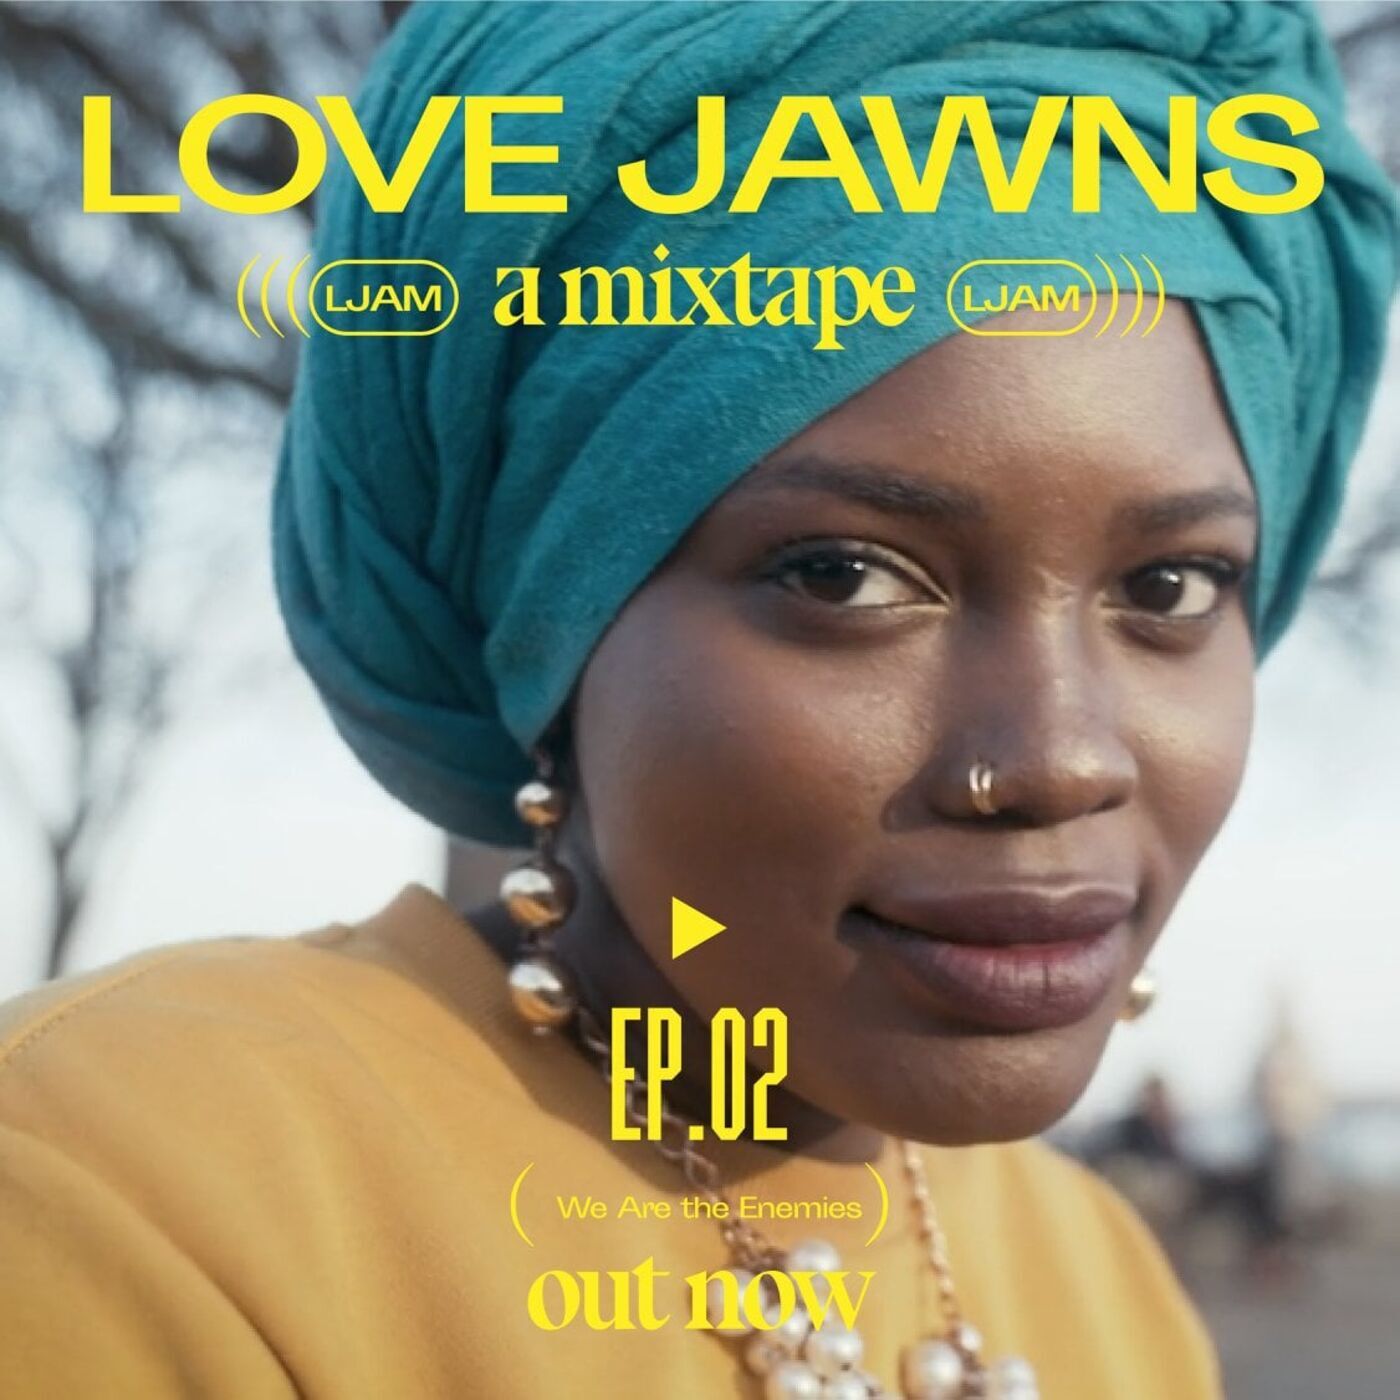 A Love Jawns podcast cover that says "Love Jawns, a mixtape, Ep.o2, We Are the Enemies, out now"